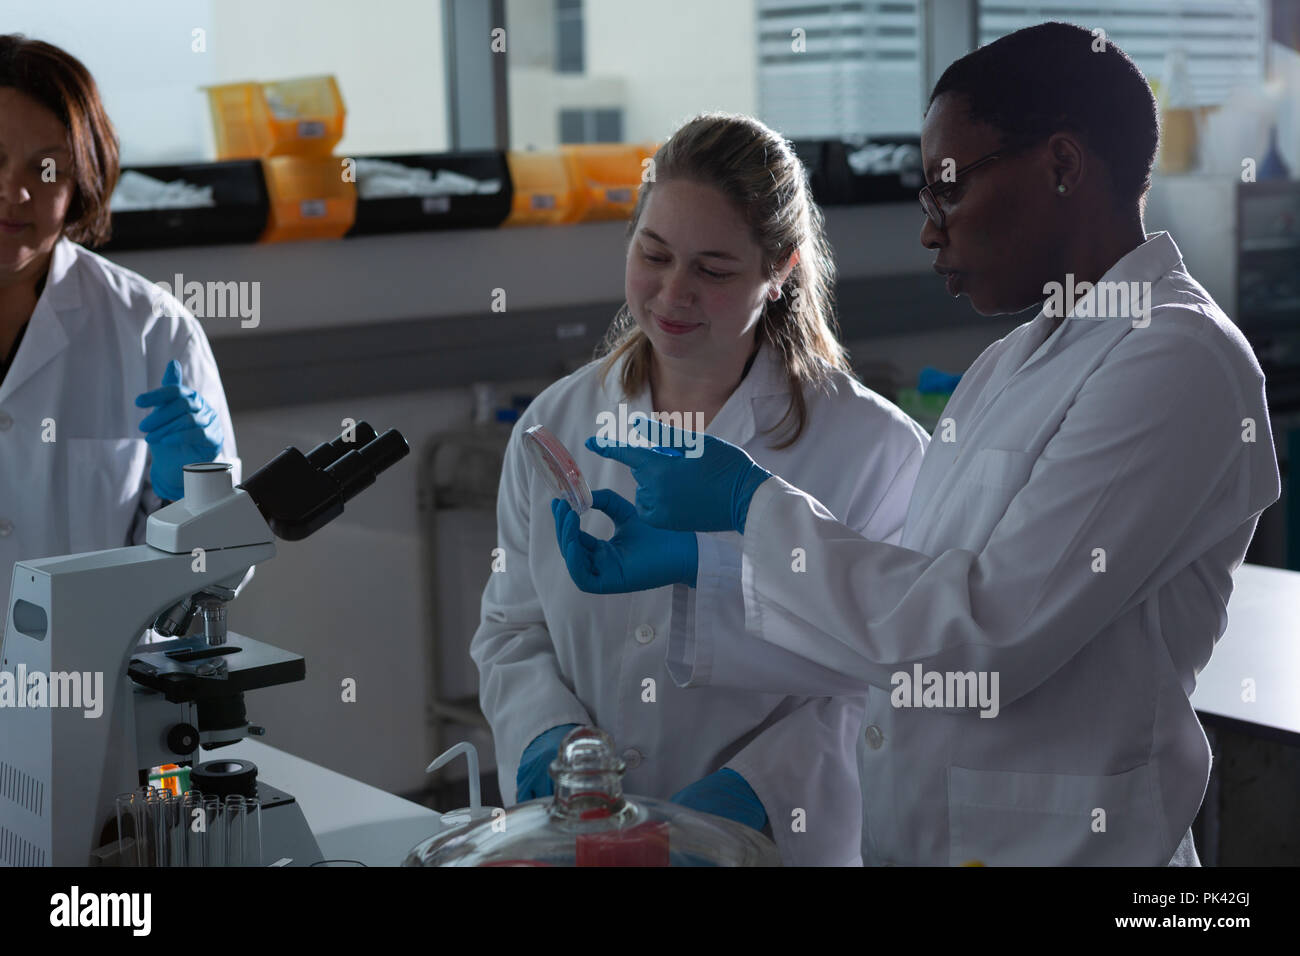 Team of scientists discussing over lab equipment Stock Photo